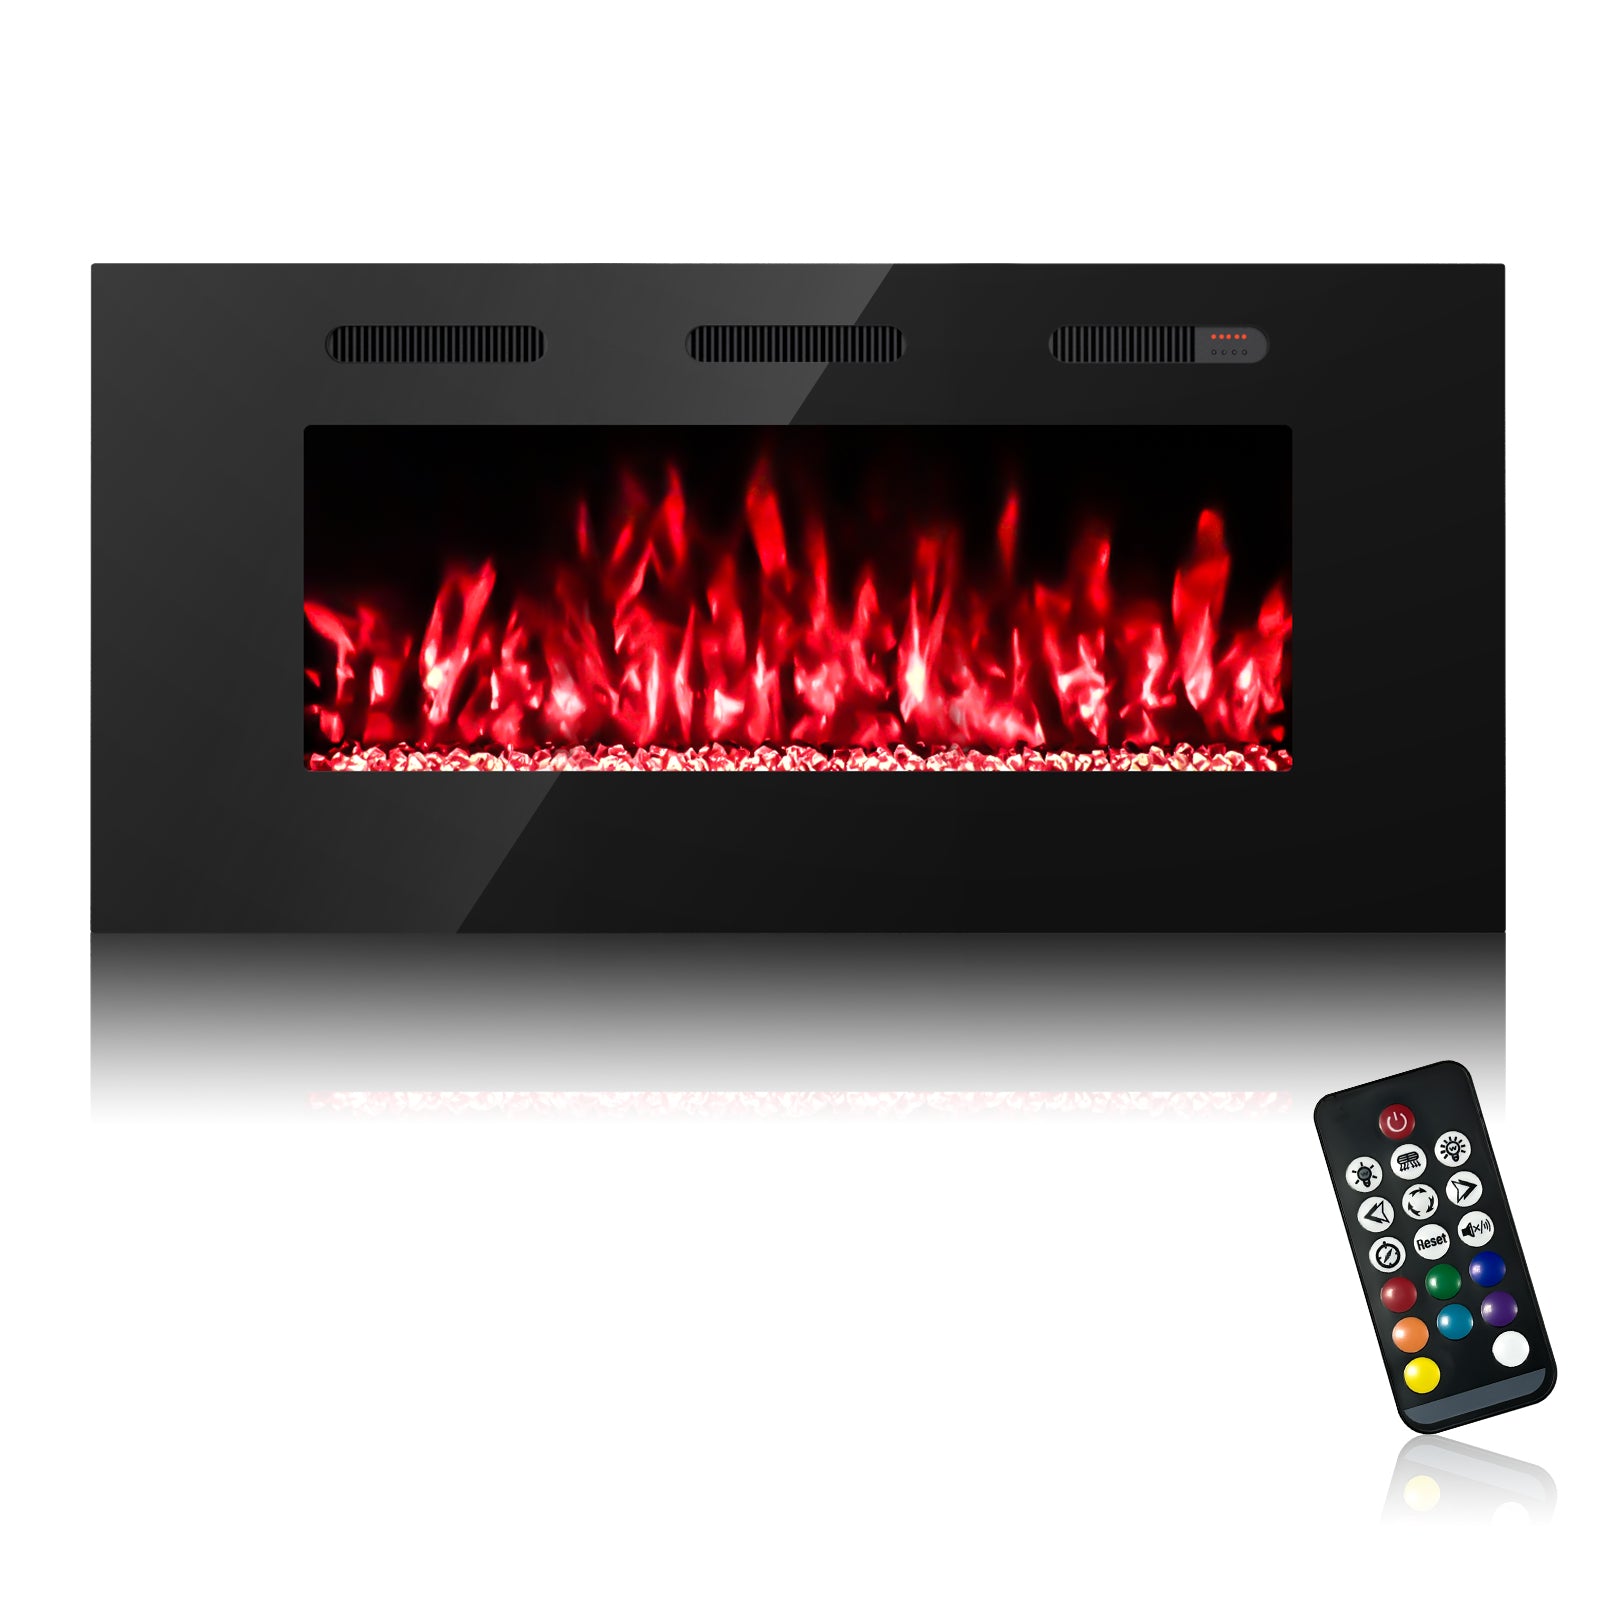 50-inch Ultra Thin Wall Mounted Electric Fireplace Heater, Modern Fire Place Eletric Fireplace for Indoor Living Room Bedroom Use, Realistic LED Flame with Remote Control, Crystals, Black